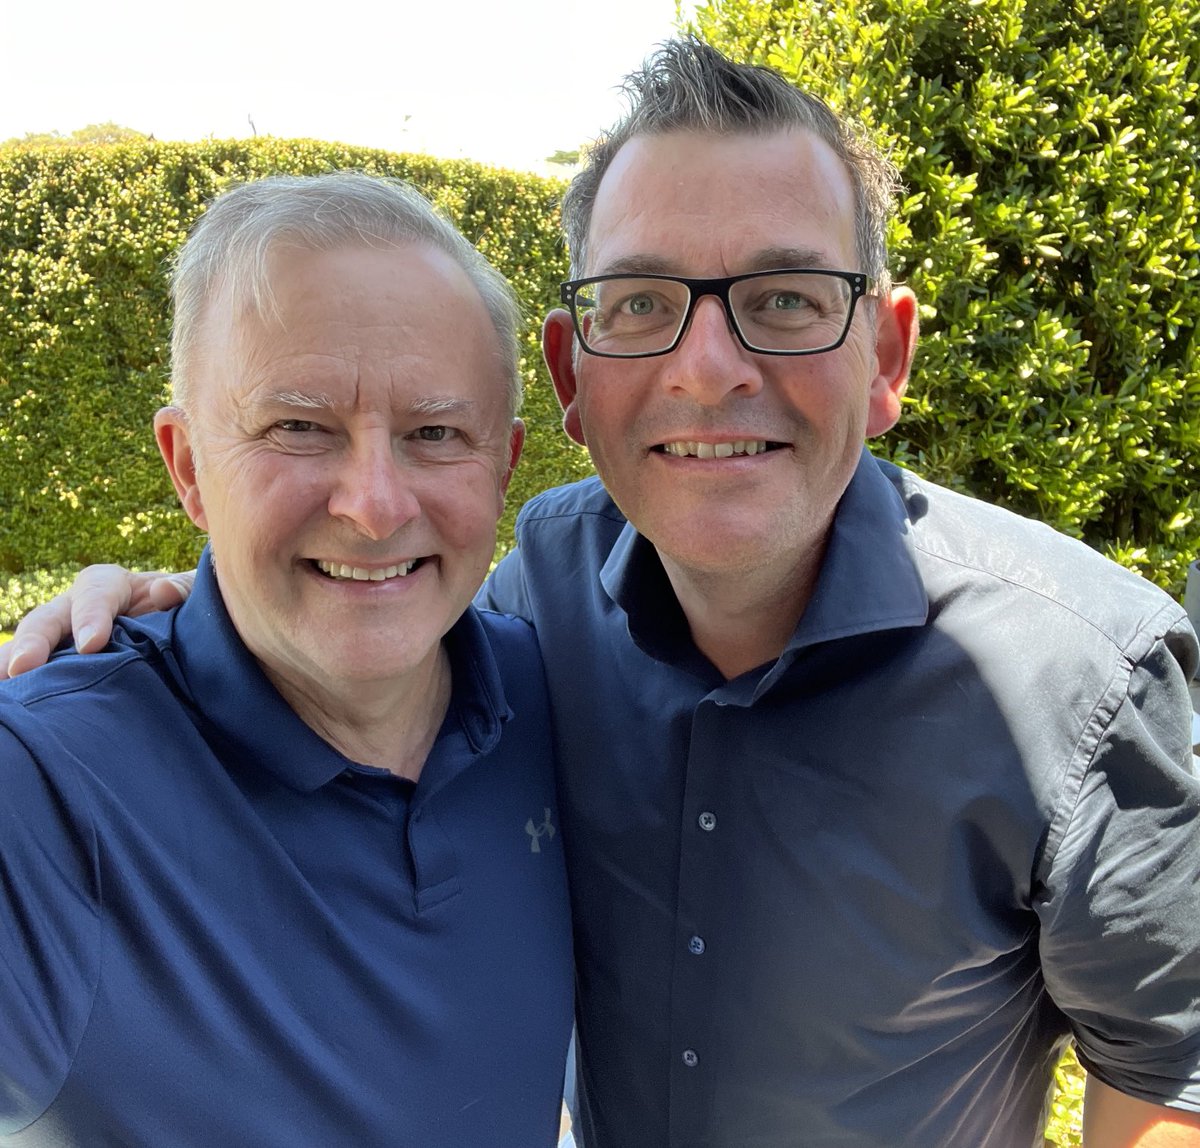 Anthony Albanese: Great to catch up with my friend ⁦@DanielAndrewsMP⁩ in Melbourne …